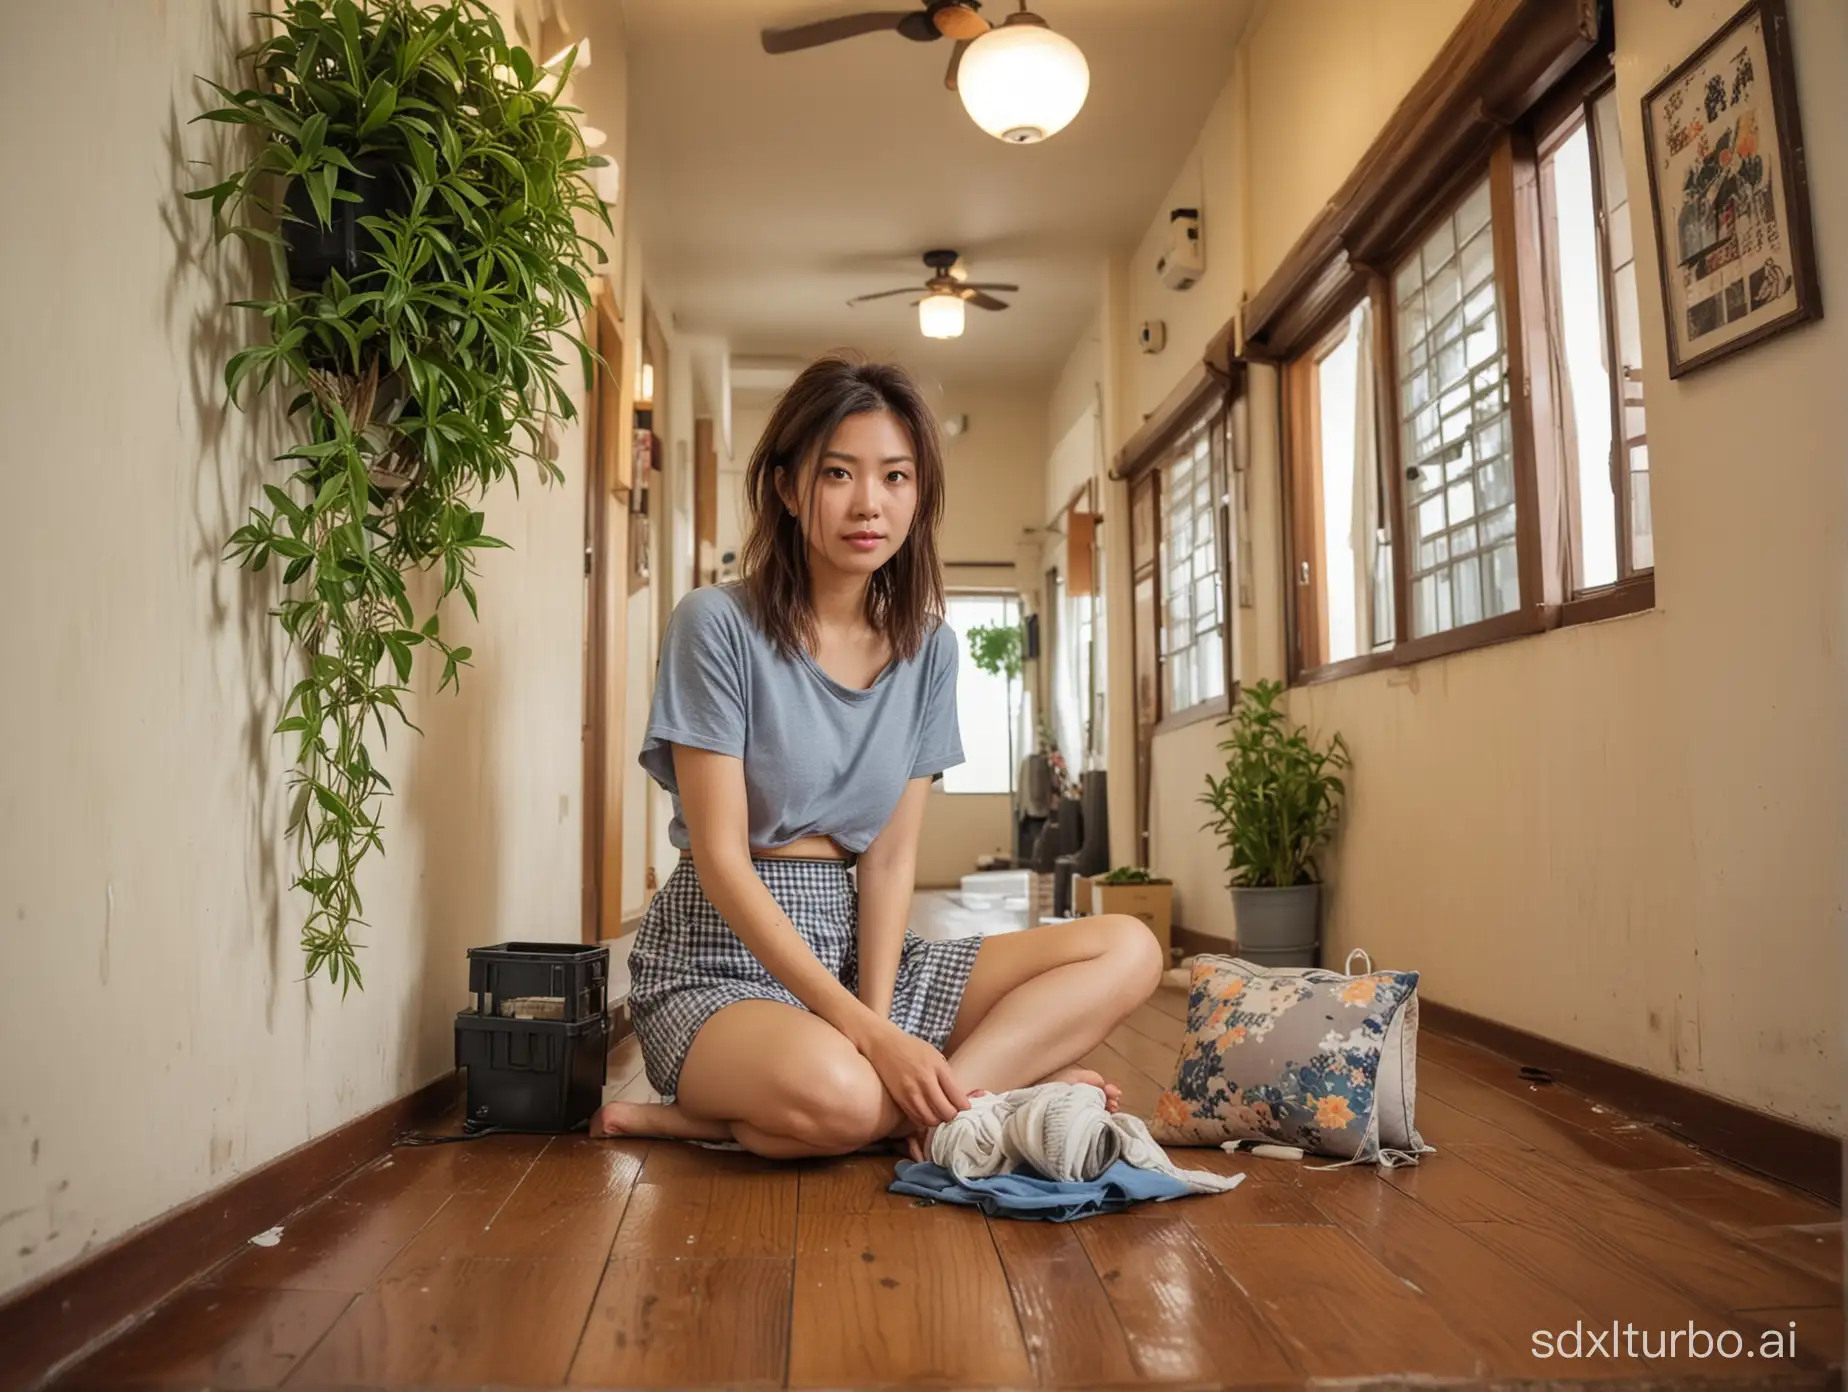 Using GOPRO camera style to generate a photo, a photo of a 28-year-old Taiwanese woman with messy hair. She looks a bit focused. She is in a Japanese-style corridor, with a small electric fan, mosquito coil, slippers, lantern, and some small potted plants. Beside the Japanese-style corridor is a Japanese garden with flowers and plants, and it's raining outside. The woman is wearing a casual skirt, barefoot on the wooden floor, reading manga, holding a pillow.